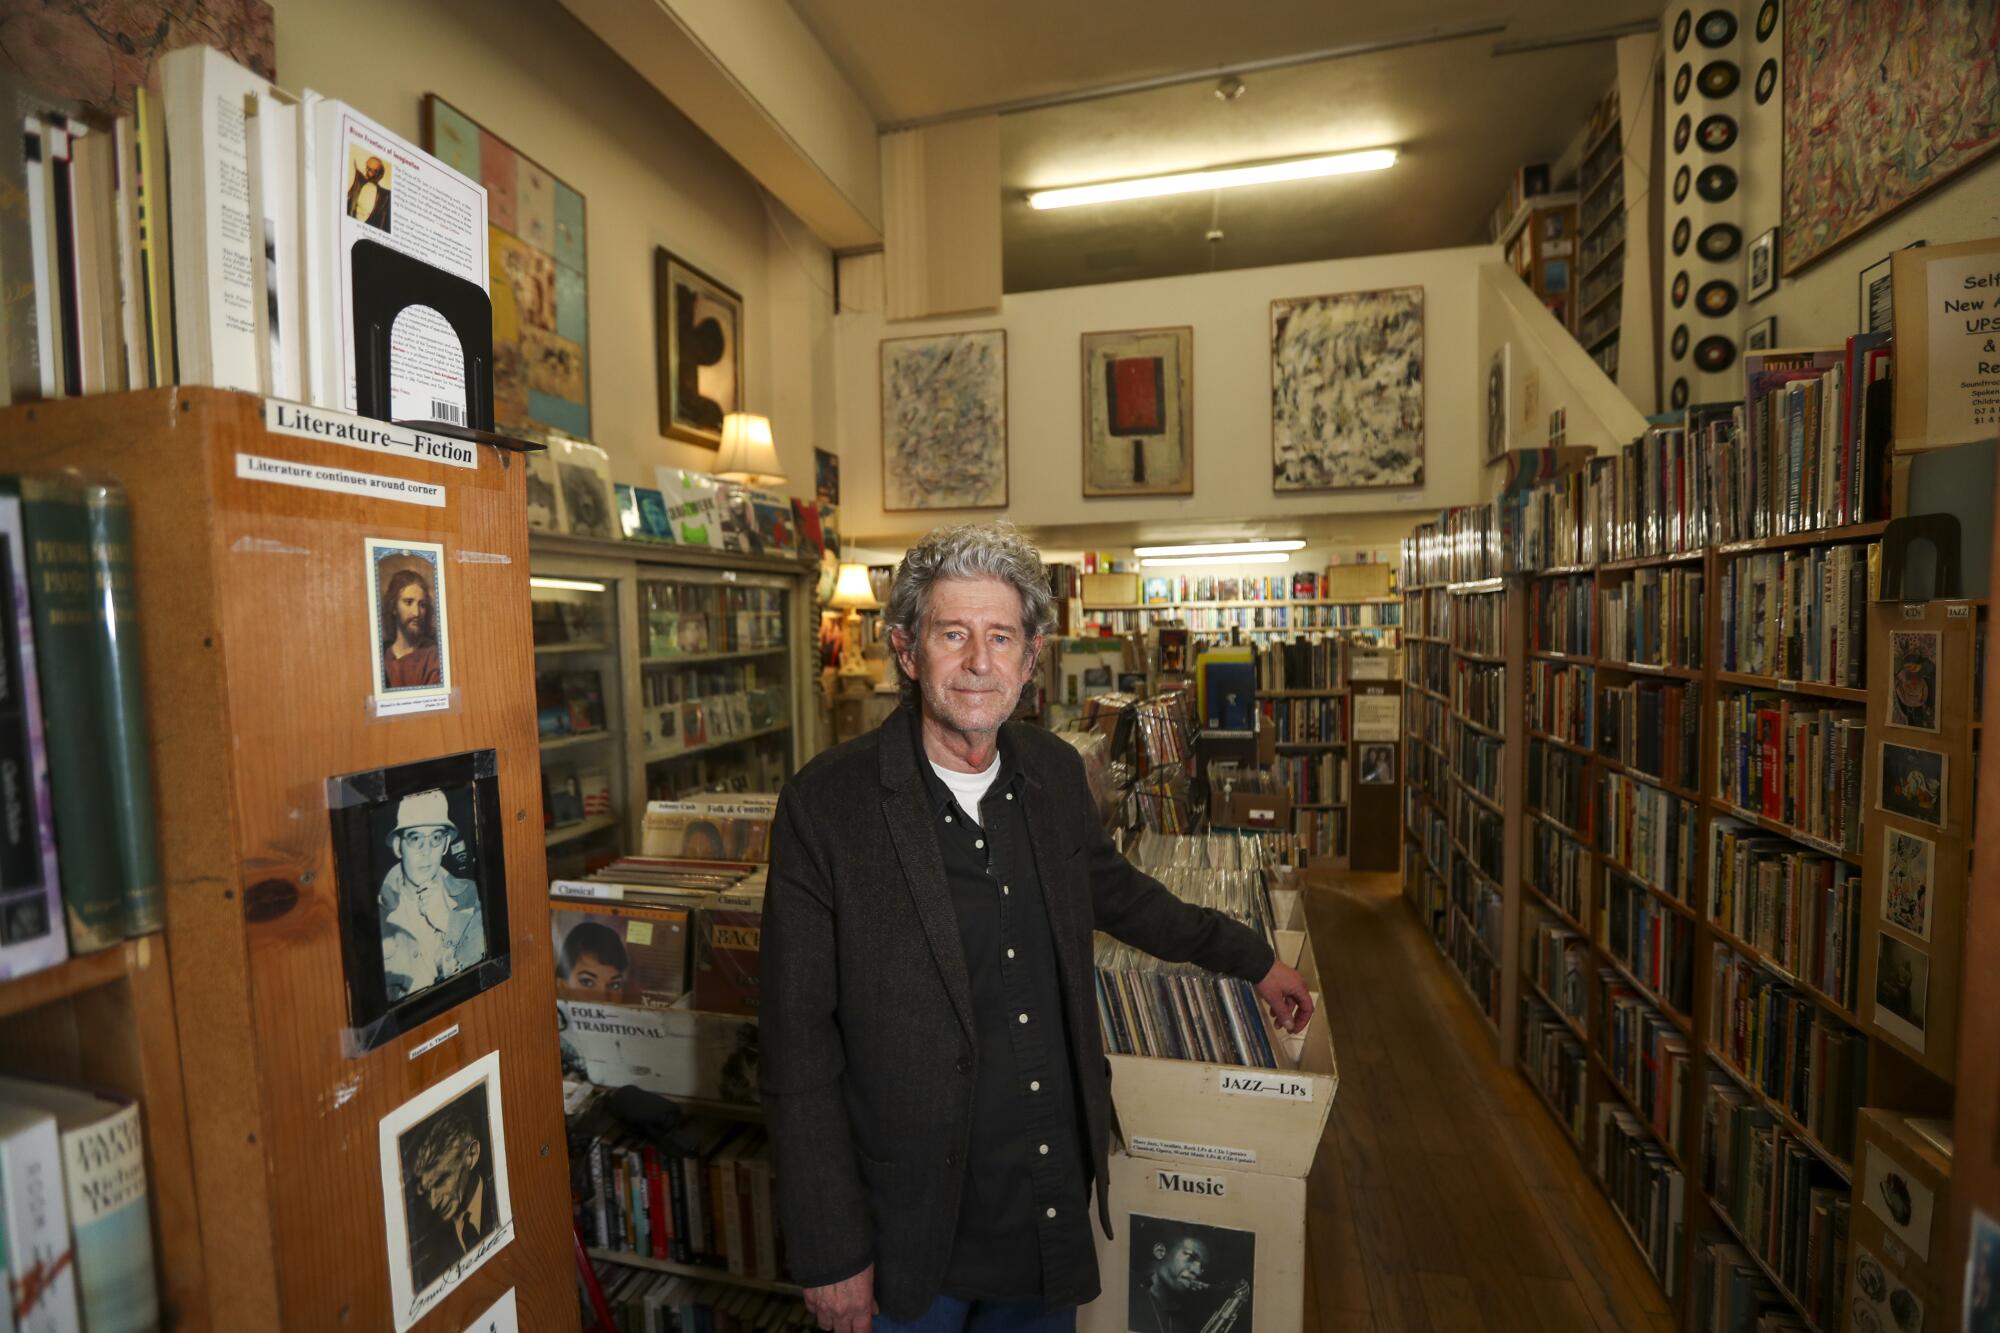 A man with curly gray hair standing in the middle of a bookstore.